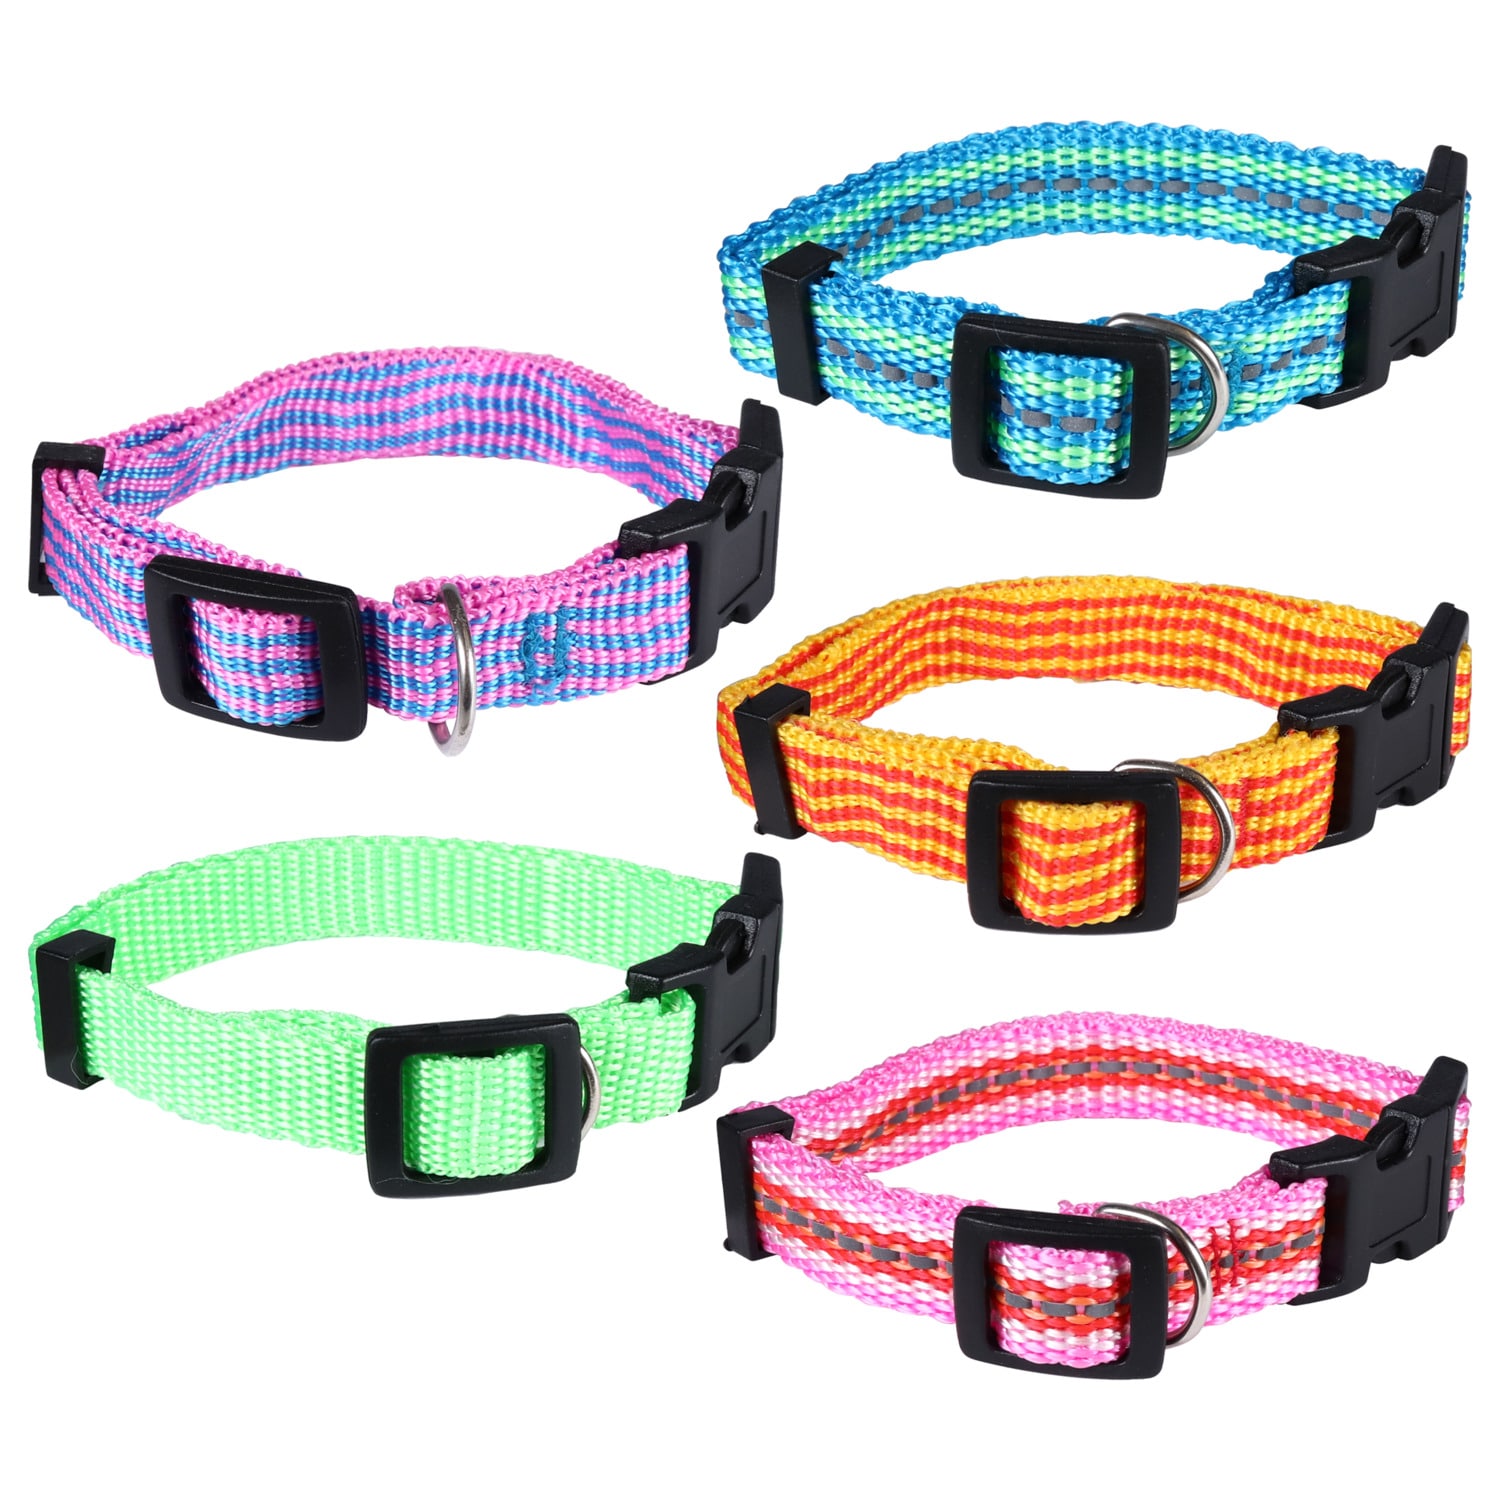 Greenbrier Kennel Club Small Adjustable Dog Harnesses 